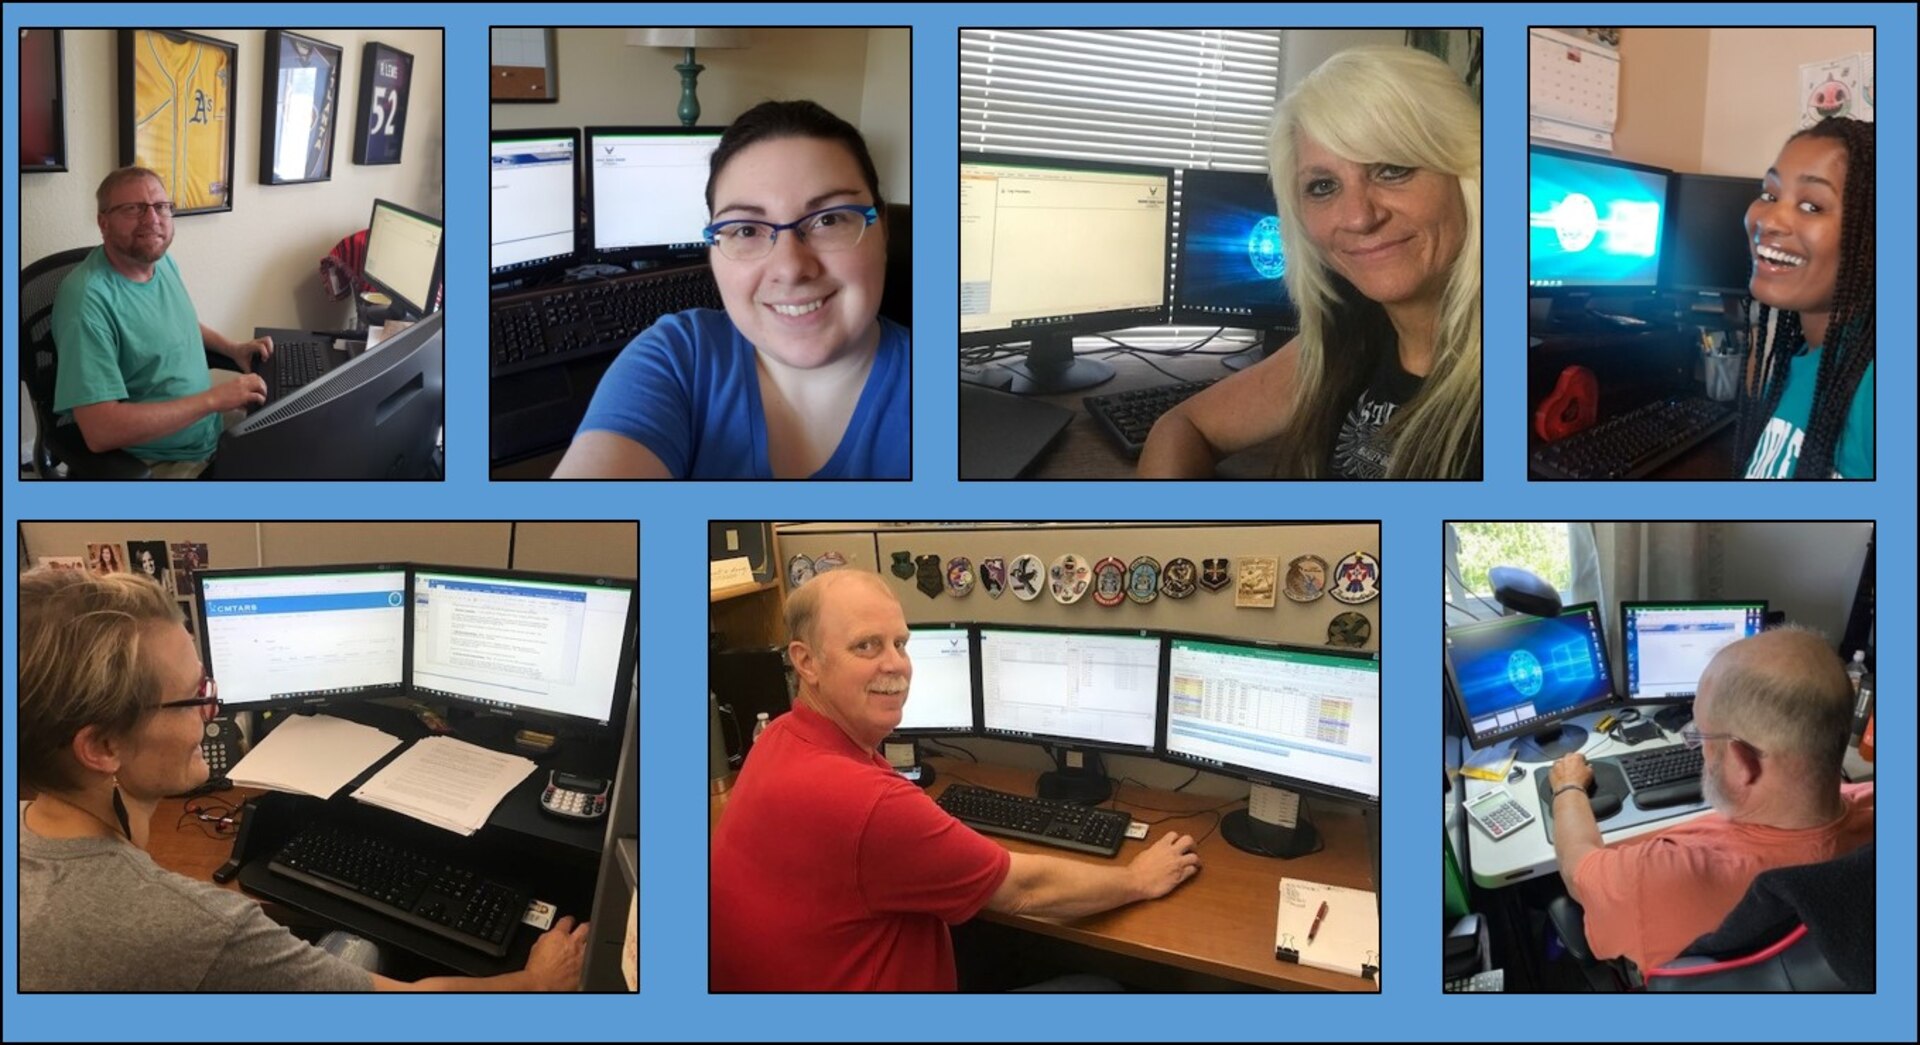 Members of the 130-person team at Travel Pay Processing - Ellsworth displayed AFIMSC's value of responsiveness to meet social distancing requirements. The team reduced the number of people in the office and transitioned many to telework status. Top row from left to right, David Gross, Tierny Ray, Melinda Hilmer, and Julie Tamin. Bottom row from left to right, Tracy McCausland, Tom Eifert, and James Copeland. (Courtesy photos)